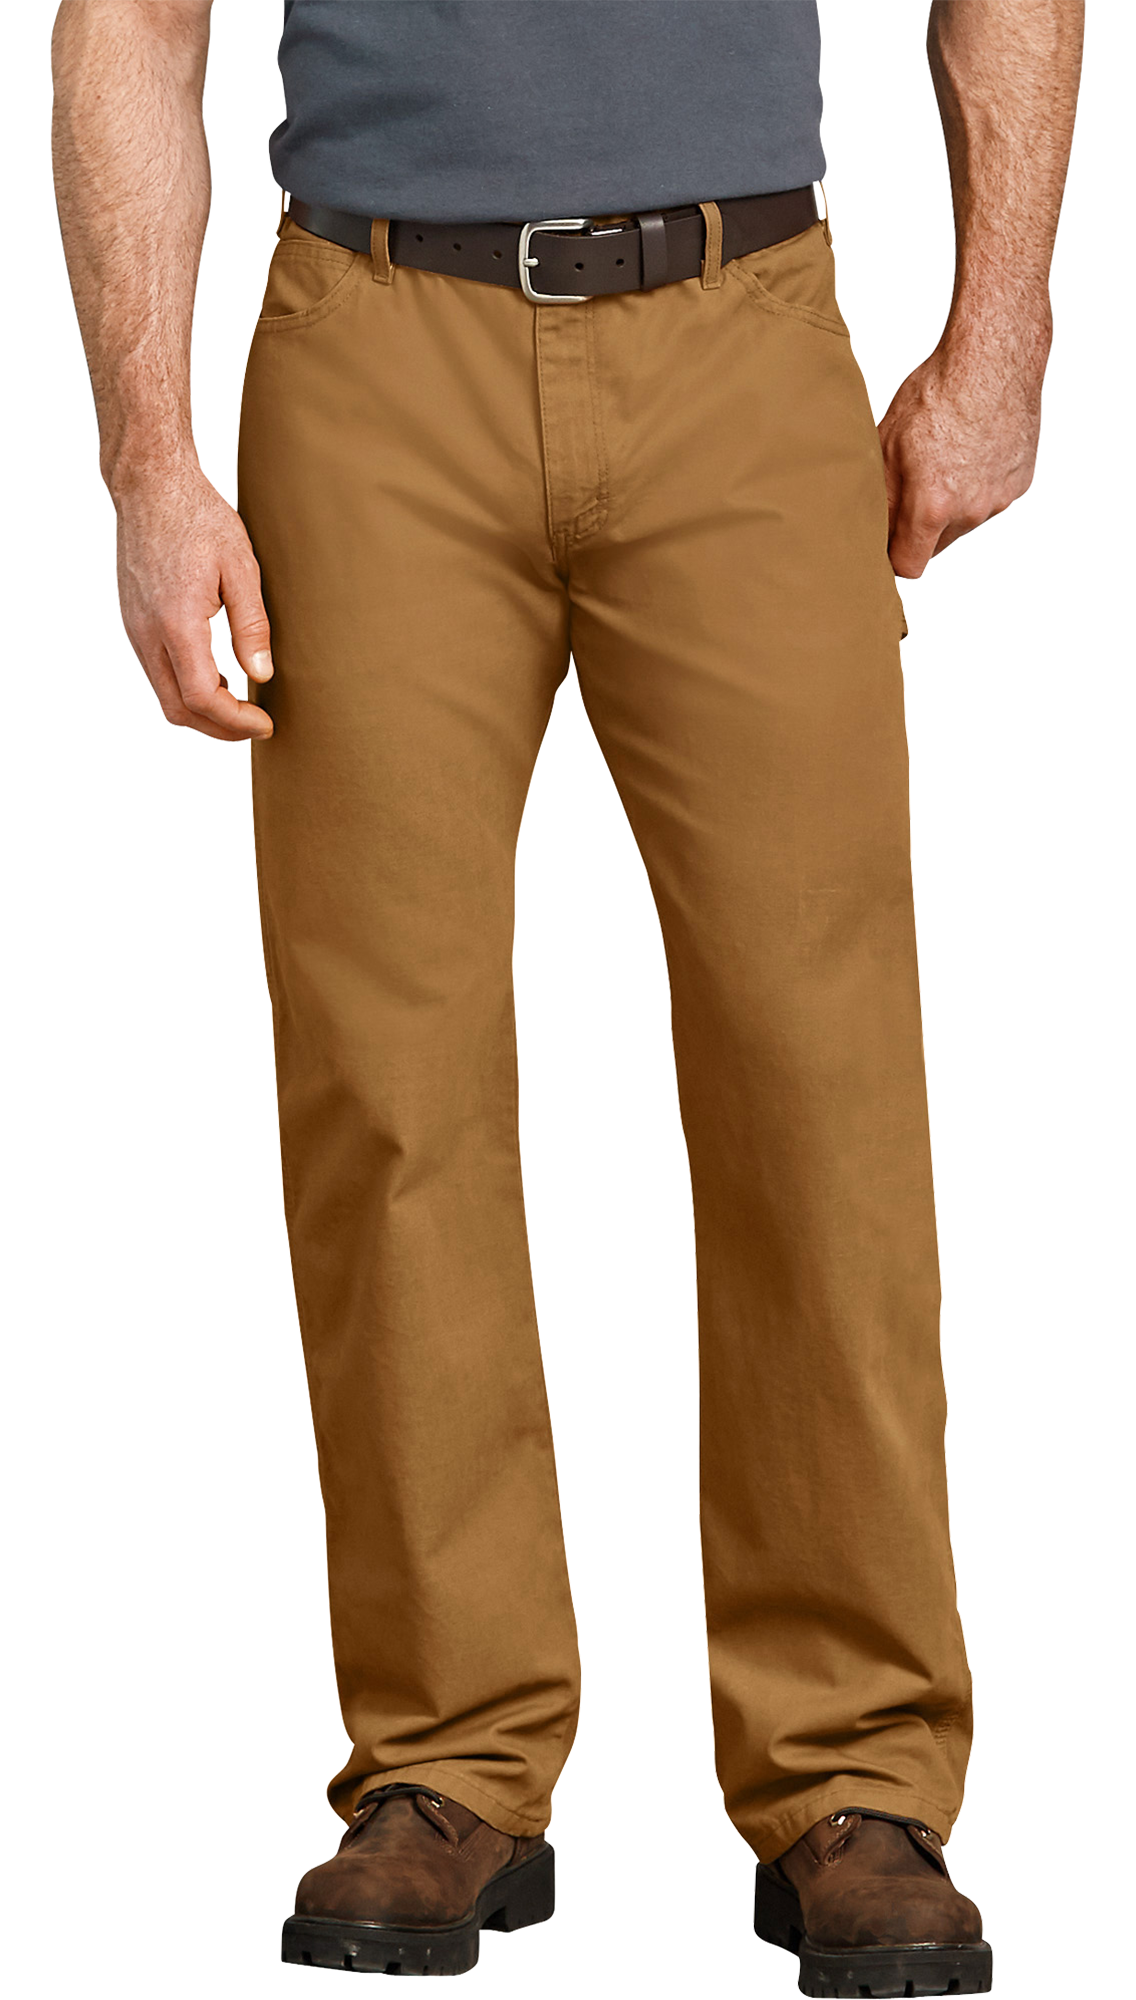 Dickies Relaxed-Fit Straight-Leg Carpenter Duck Jeans for Men - Rinsed Brown Duck - 38x34